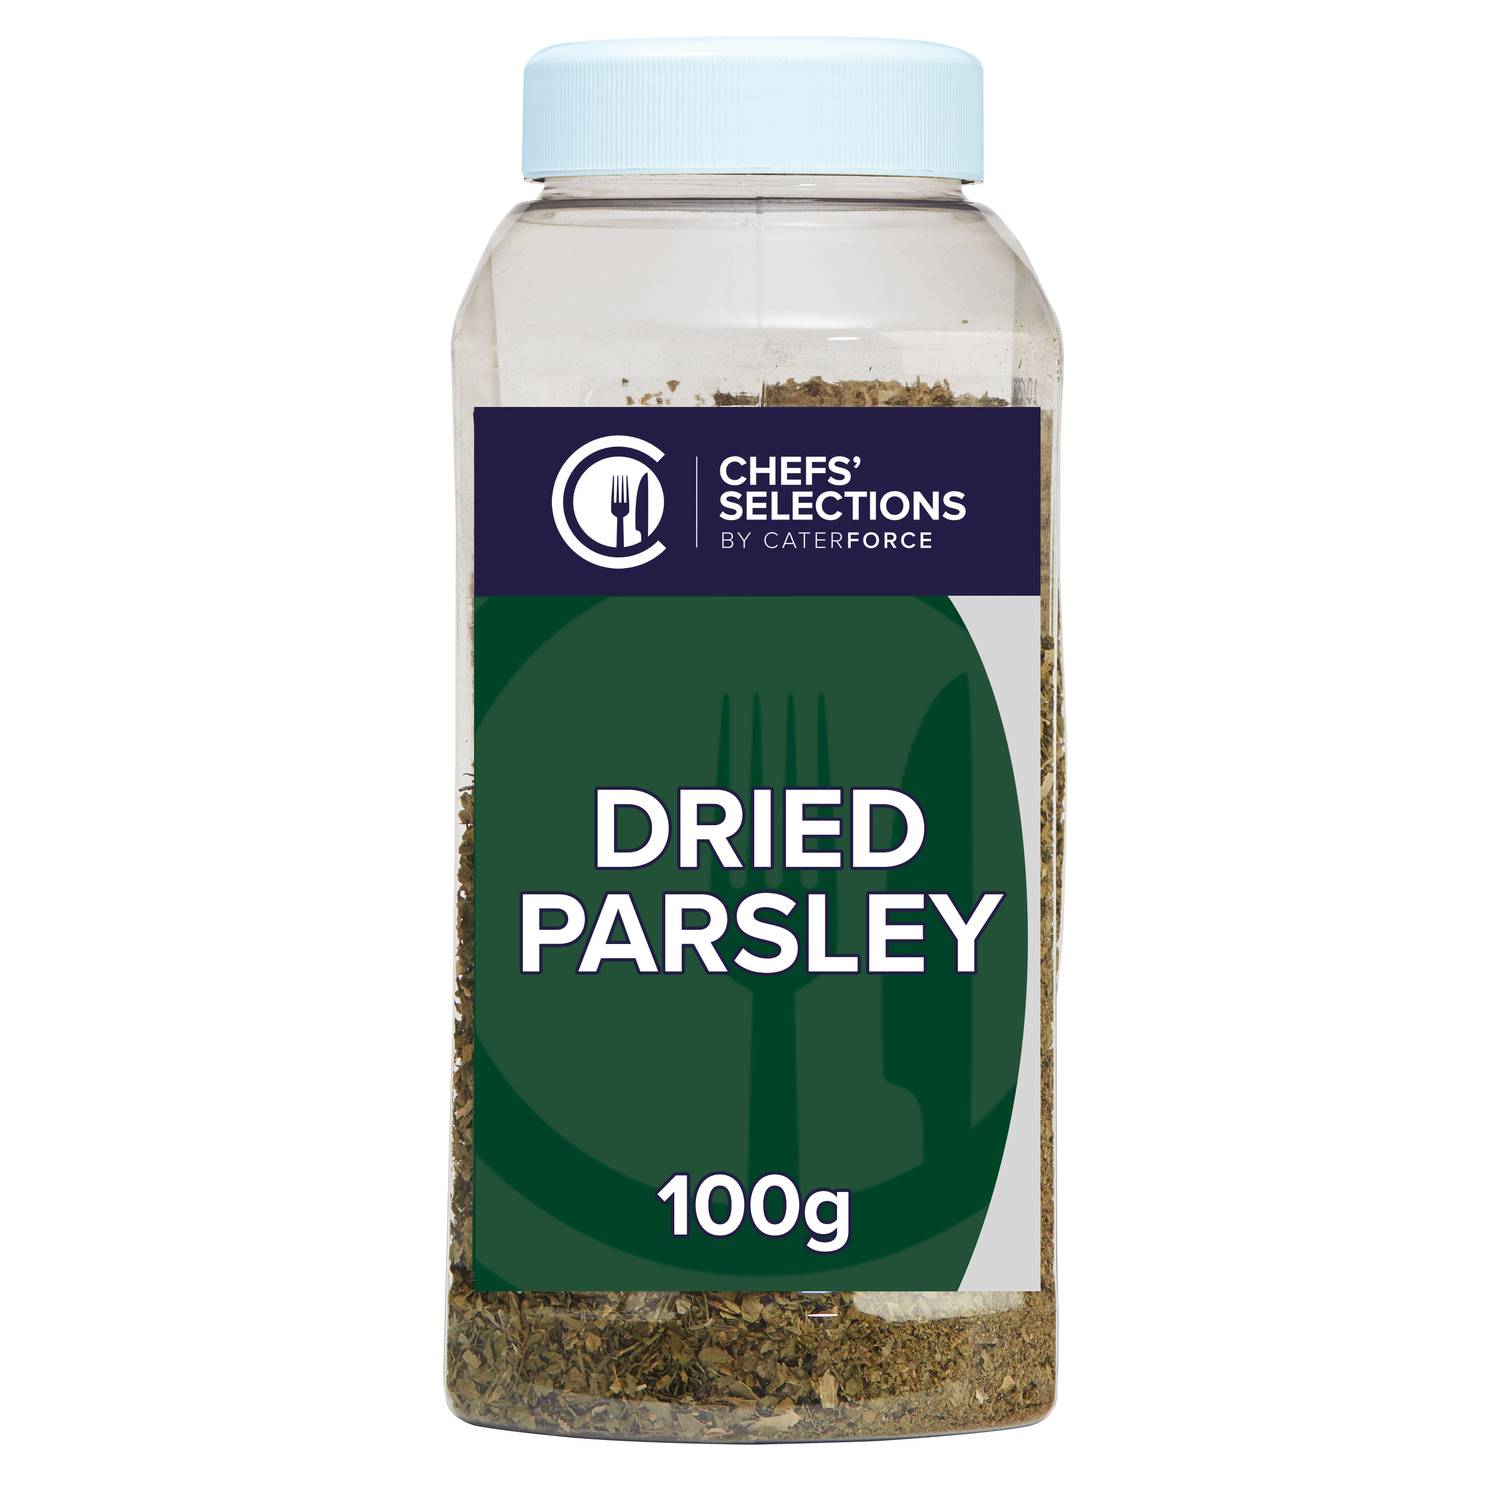 Chefs’ Selections Dried Parsley (6 x 100g)